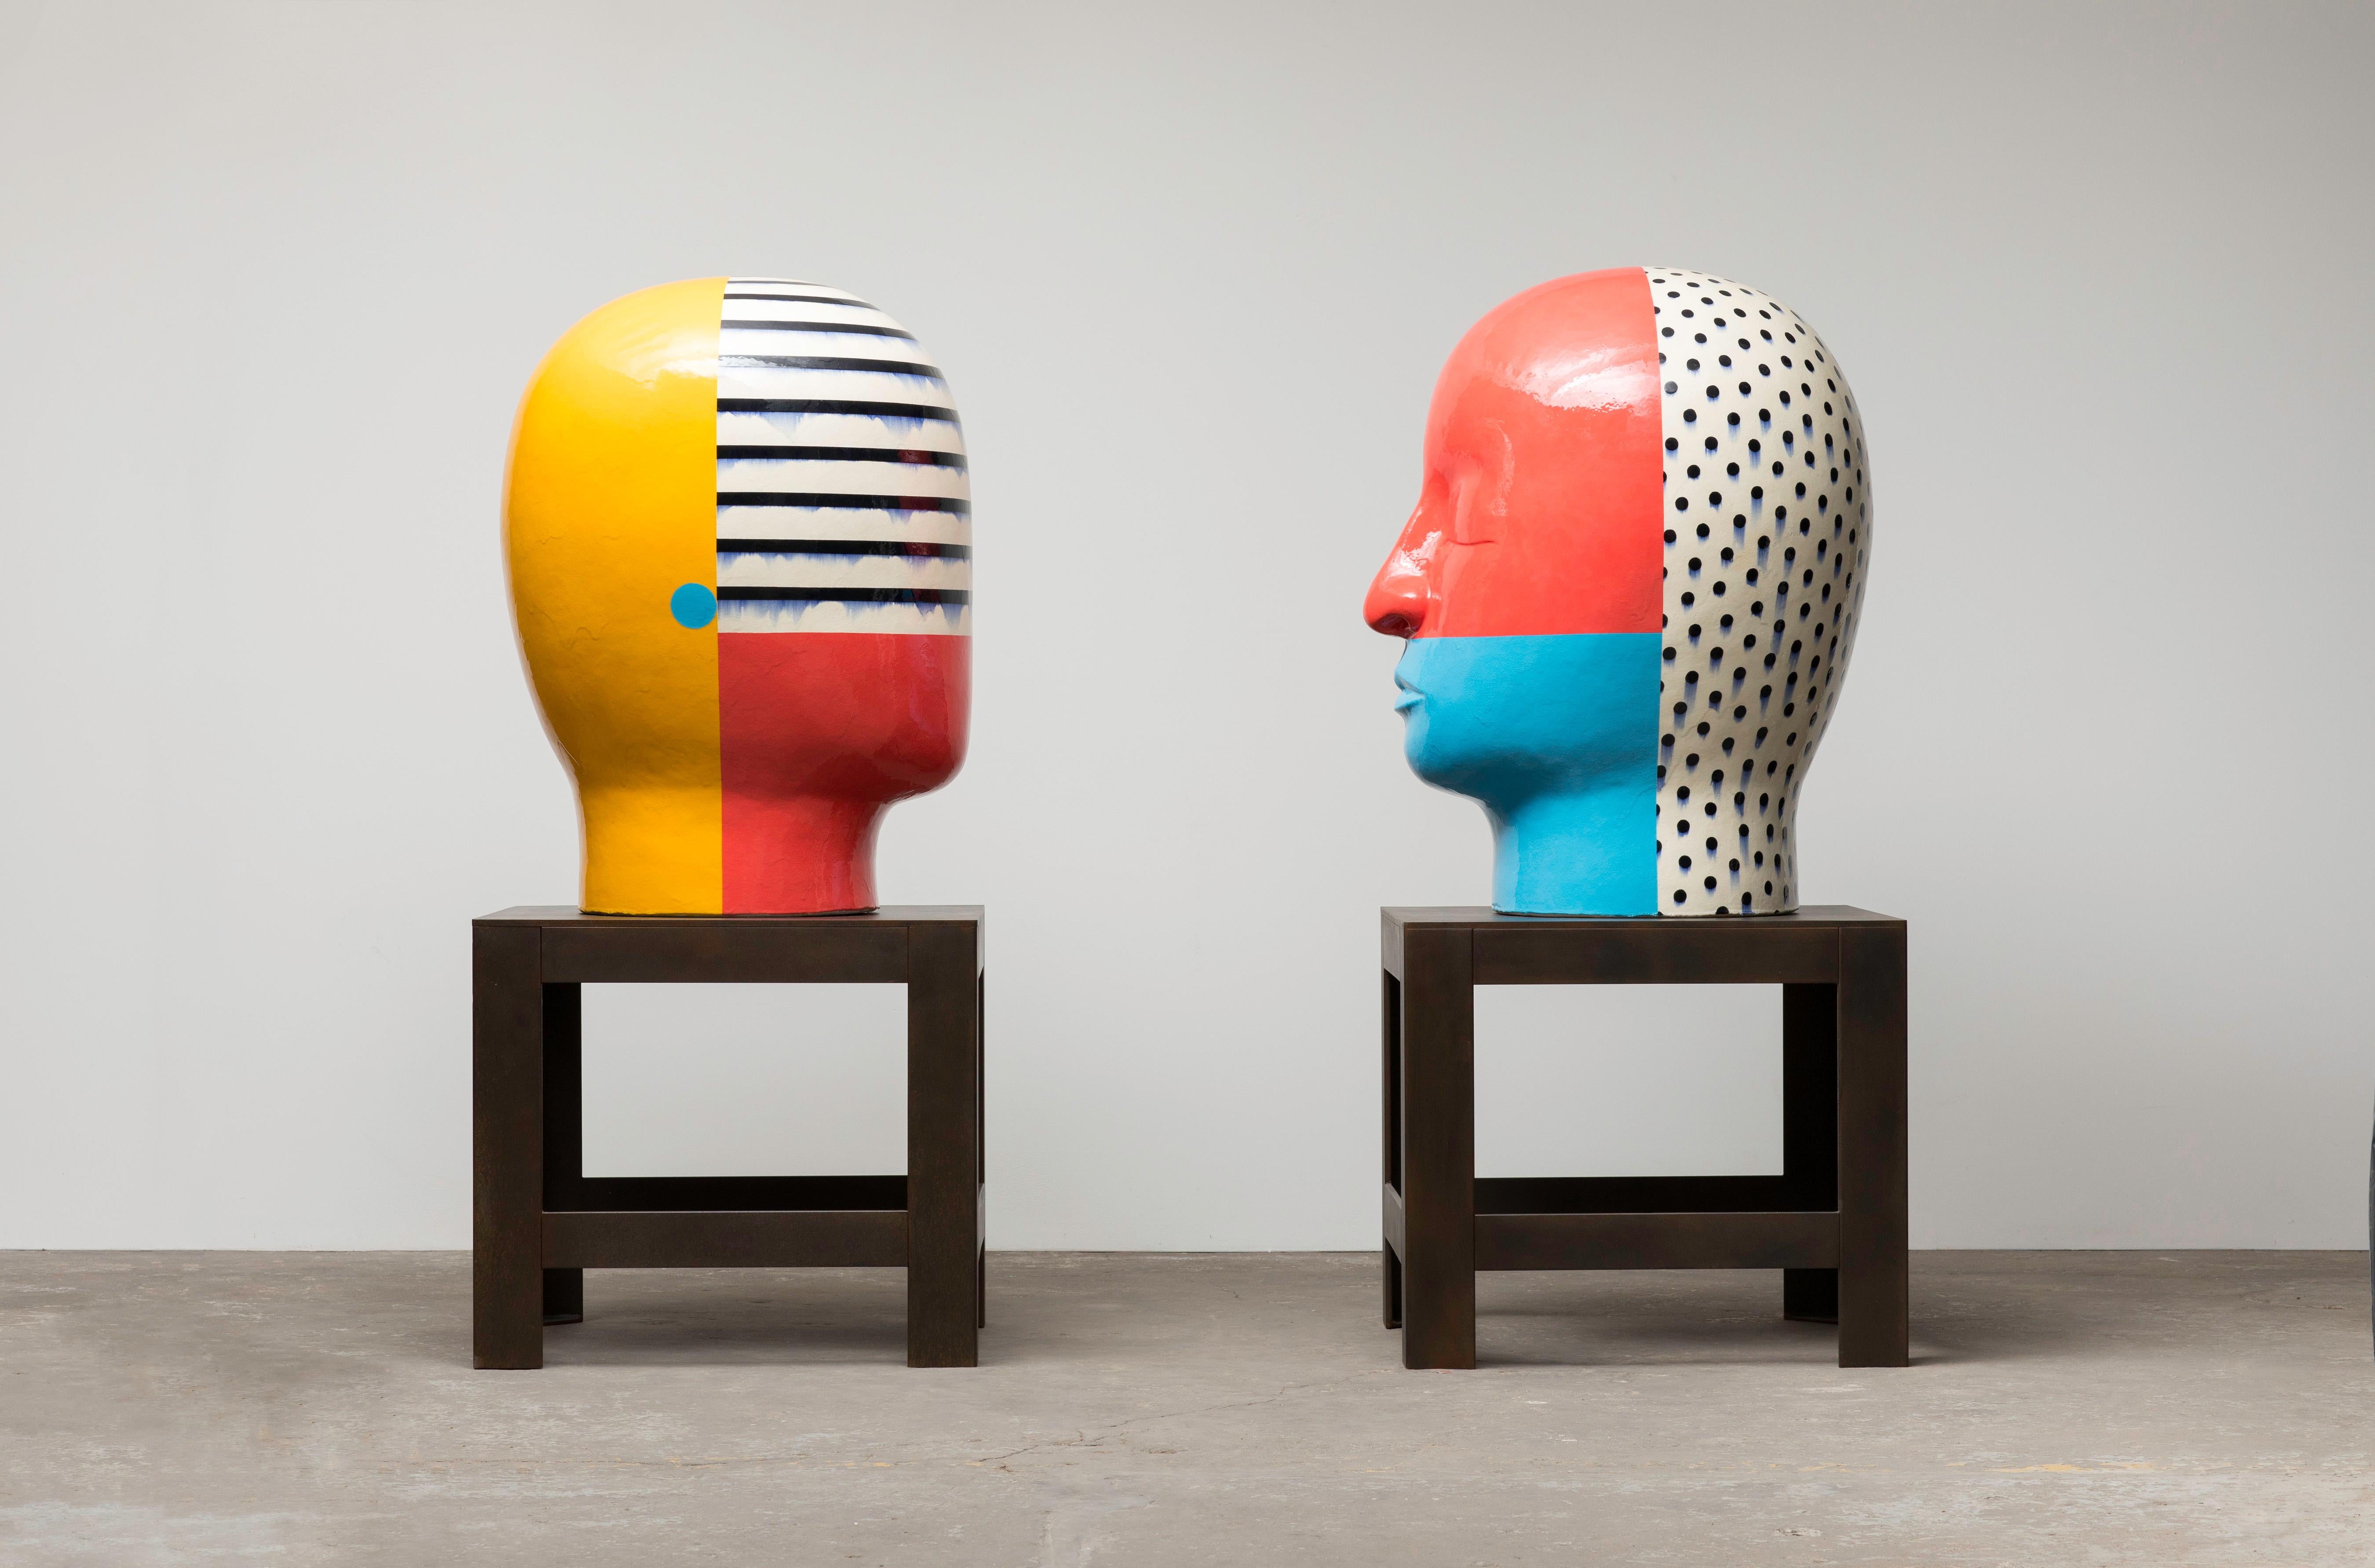 two-part sculpture by Jun Kaneko:  glazed ceramic and stainless steel
80 x 32 3/4 x 37 inches
79 x 32 1/4 x 36 inches

